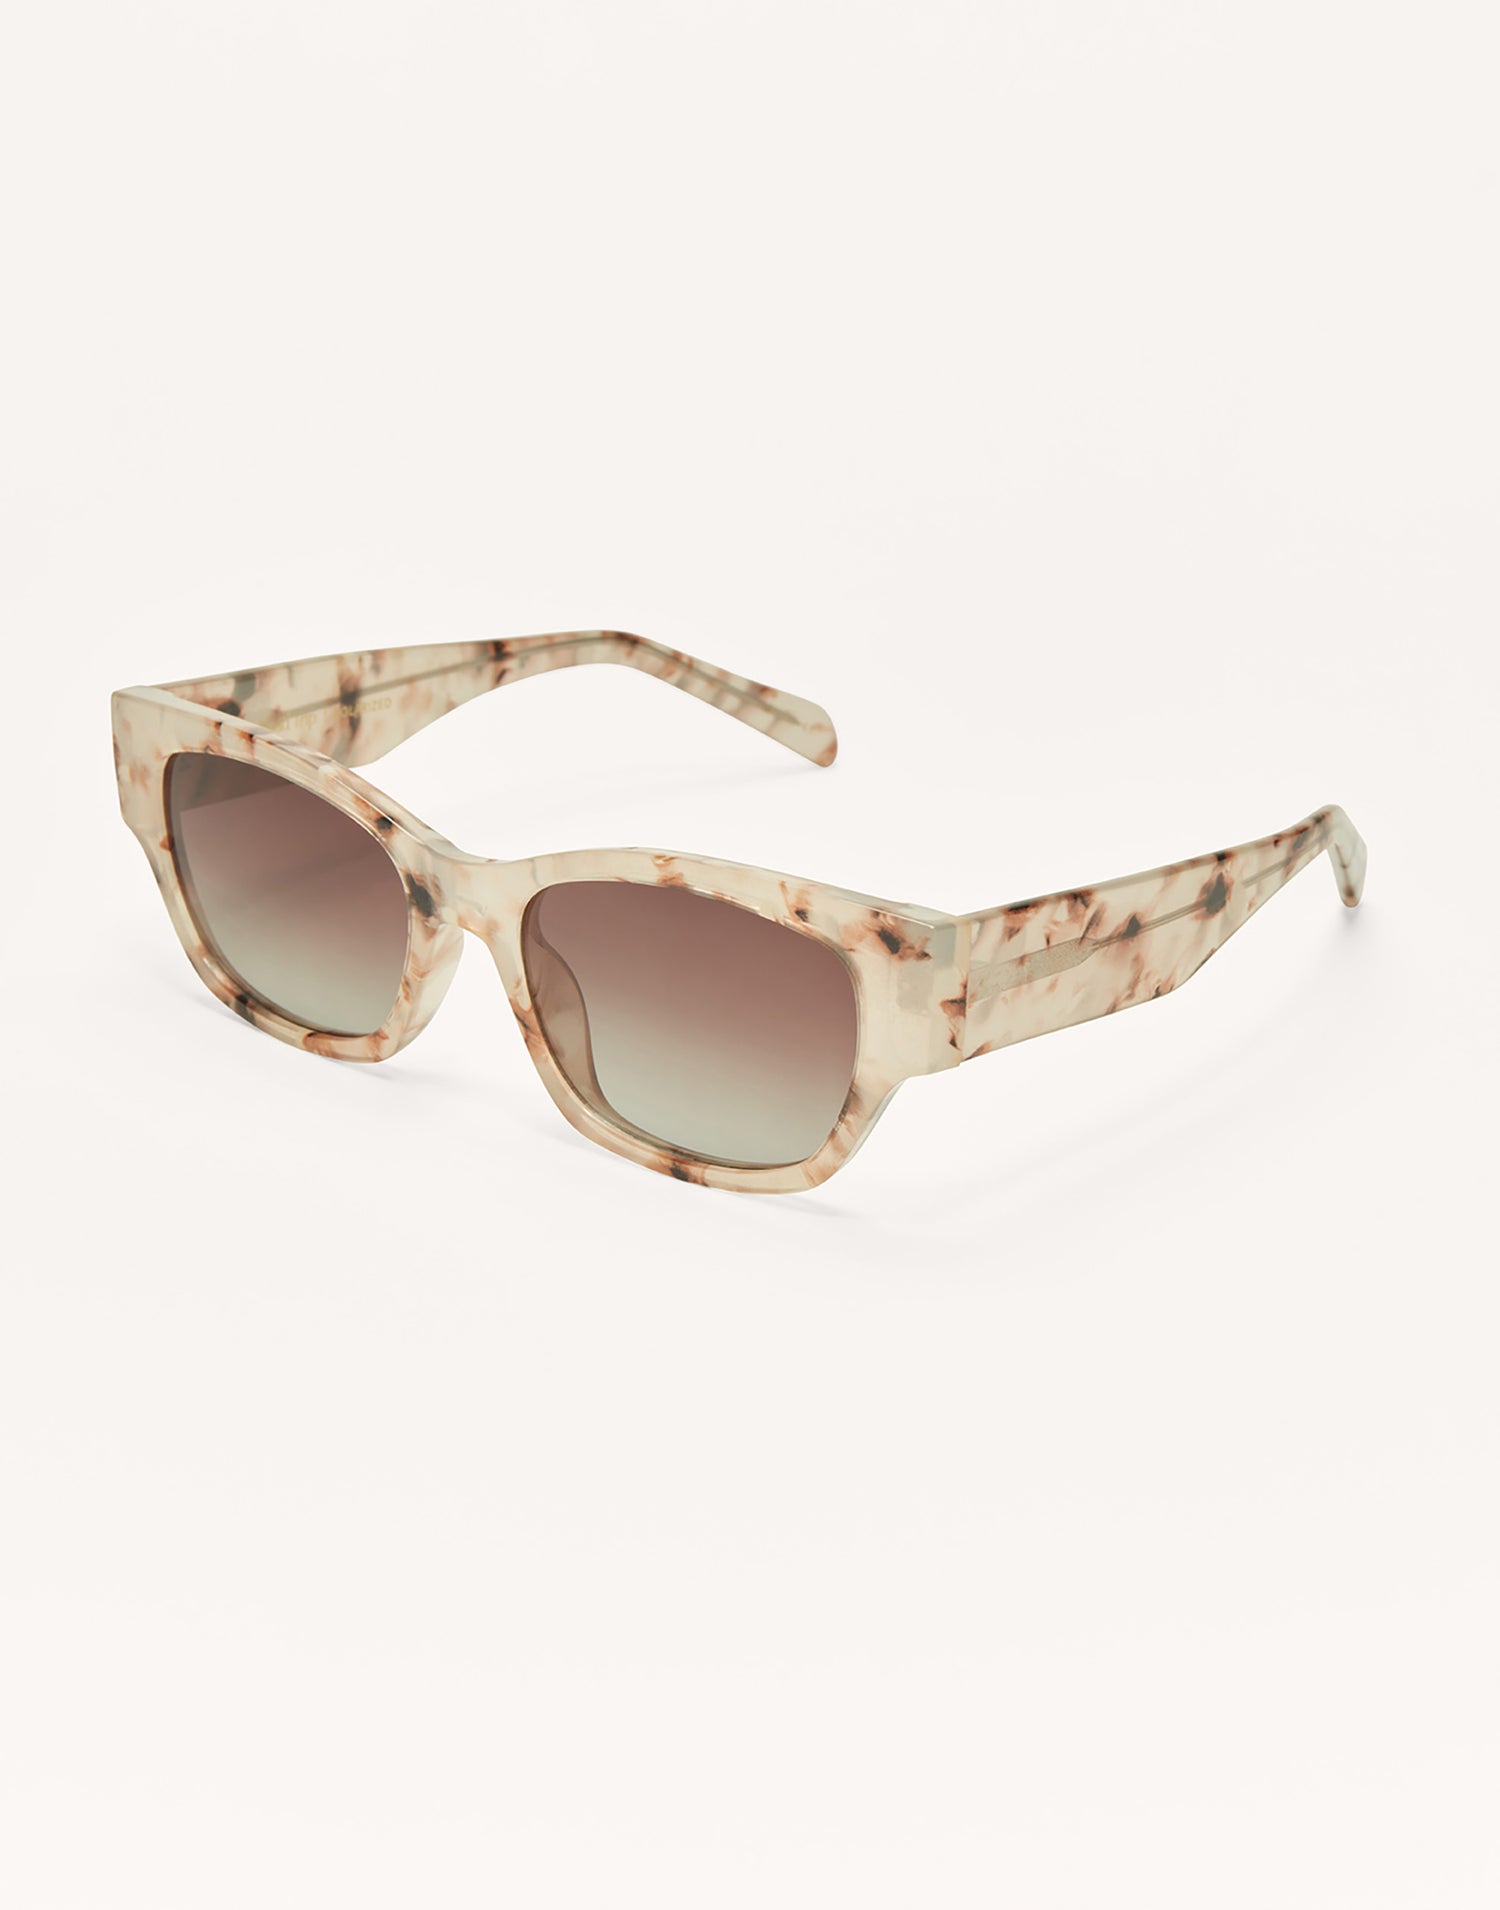 Roadtrip Sunglasses by Z Supply in Warm Sands - Angled View